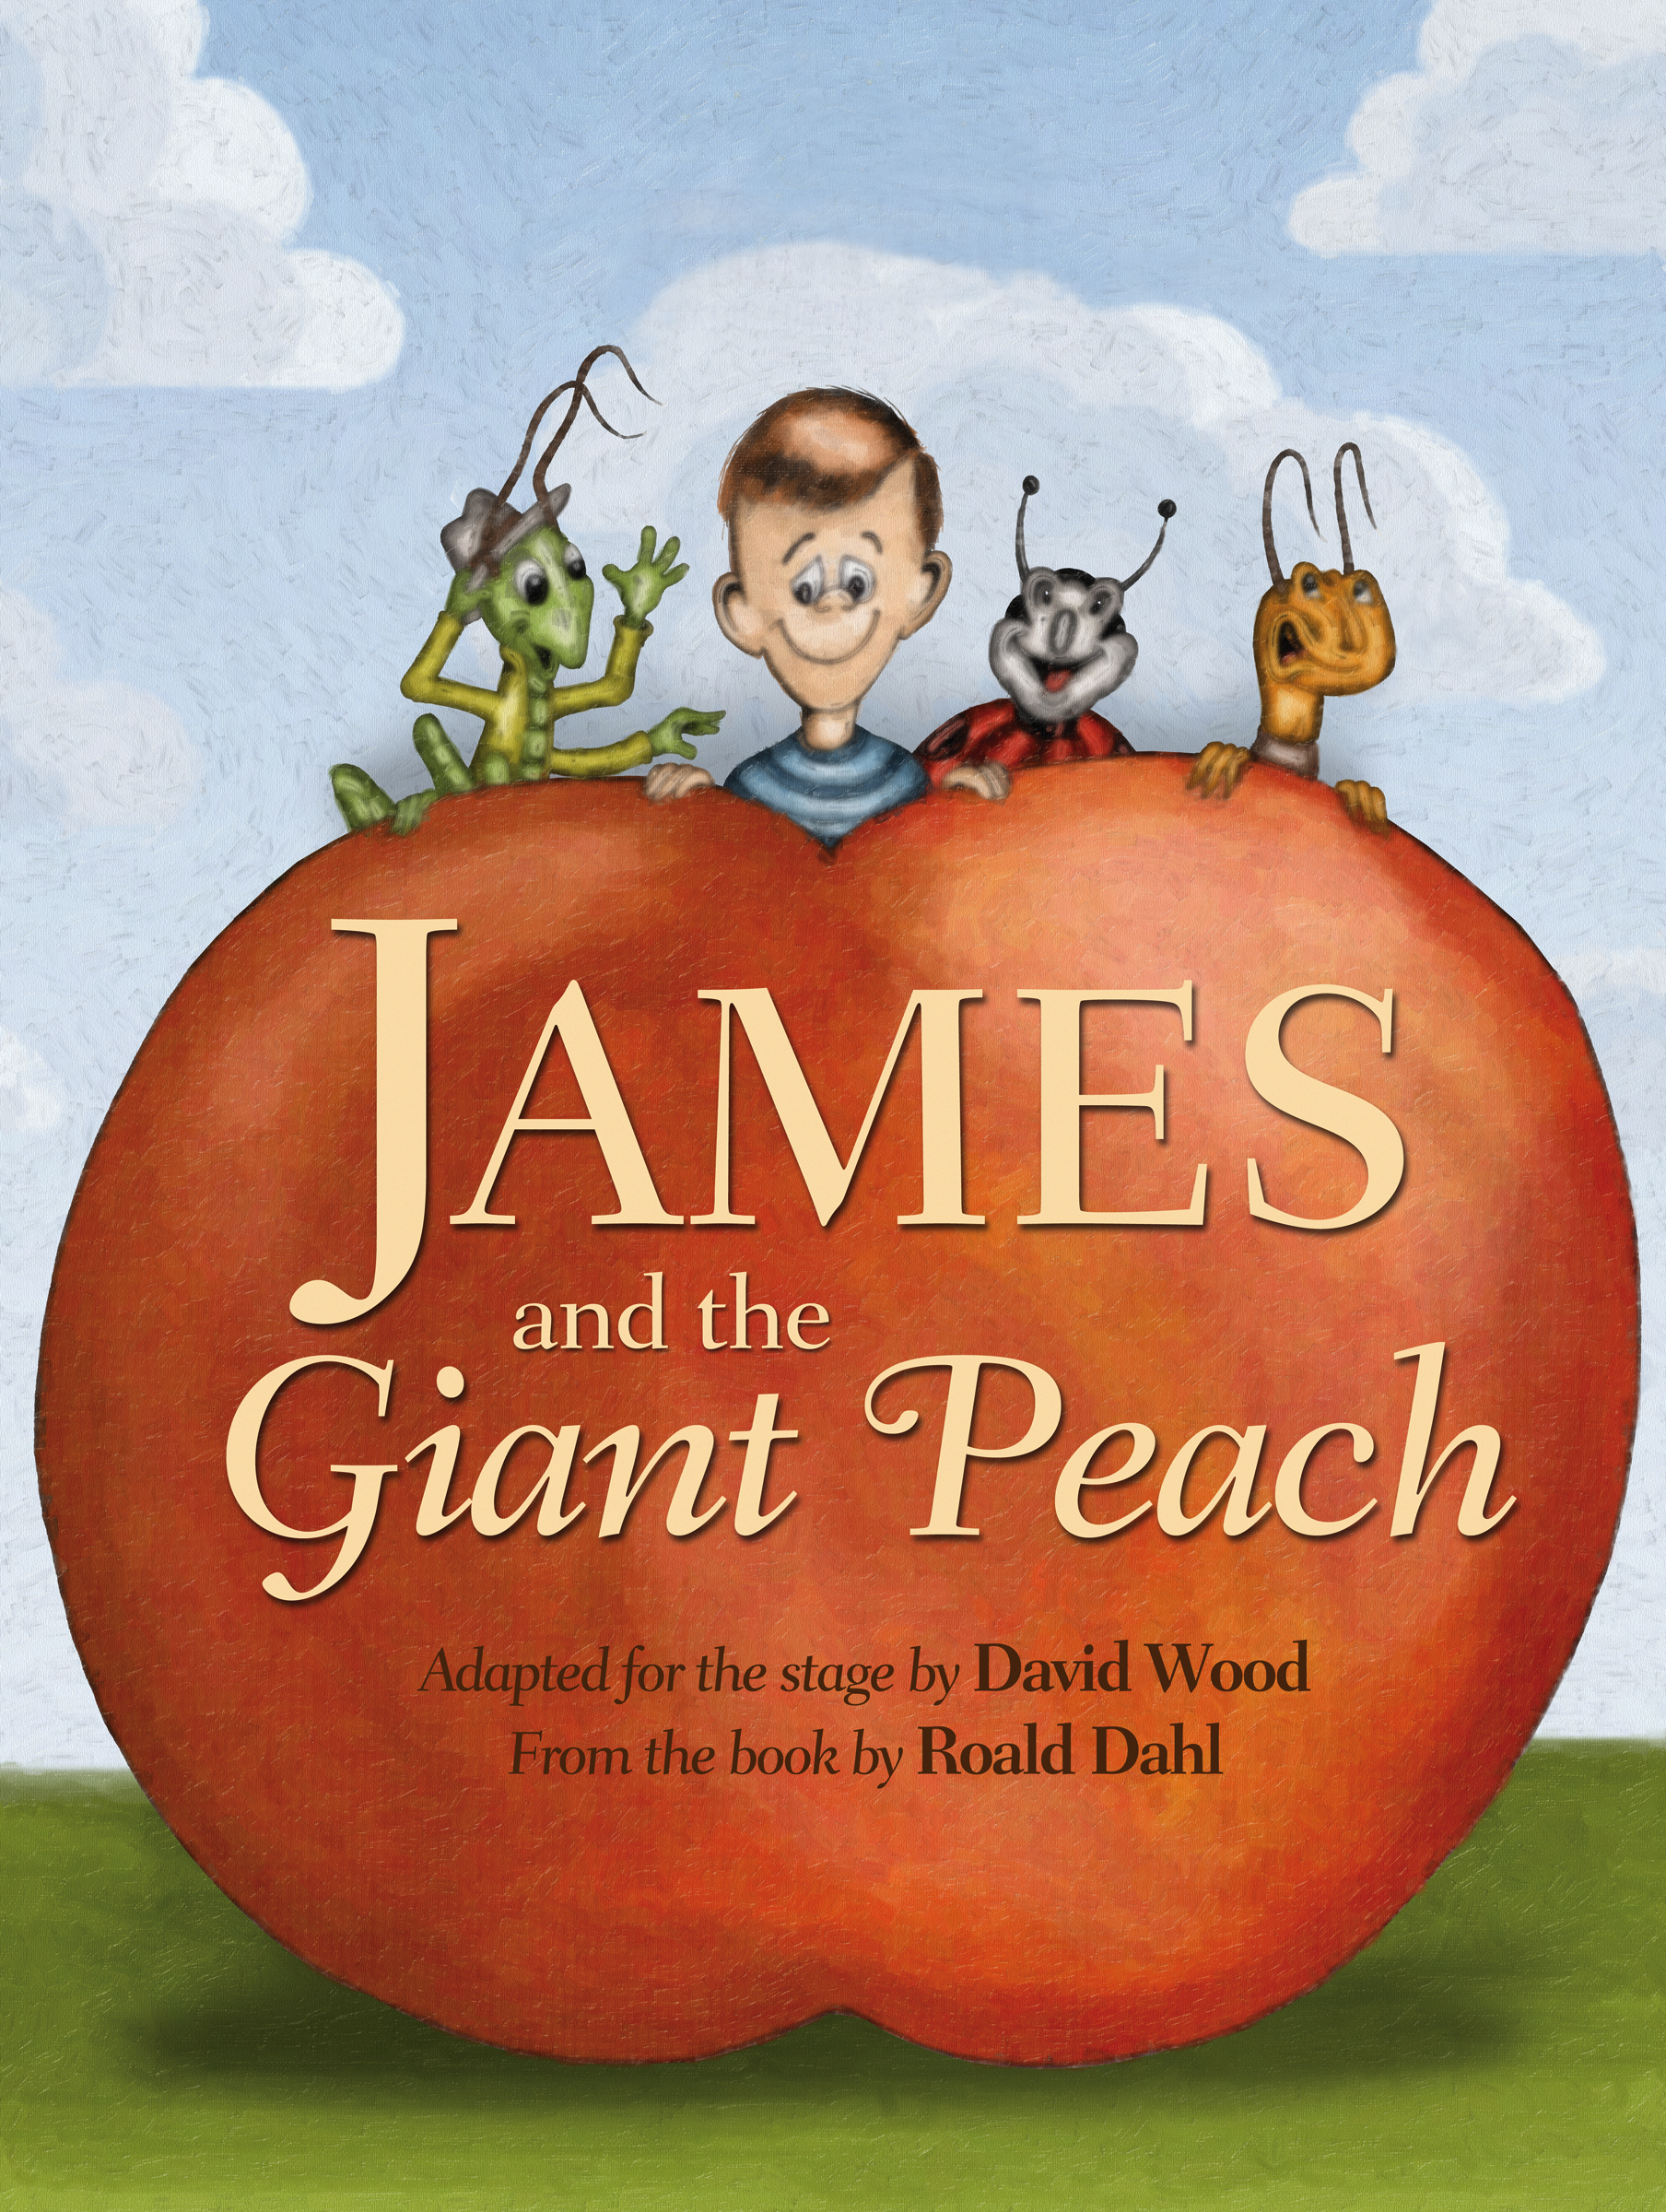 James and the giant peach.